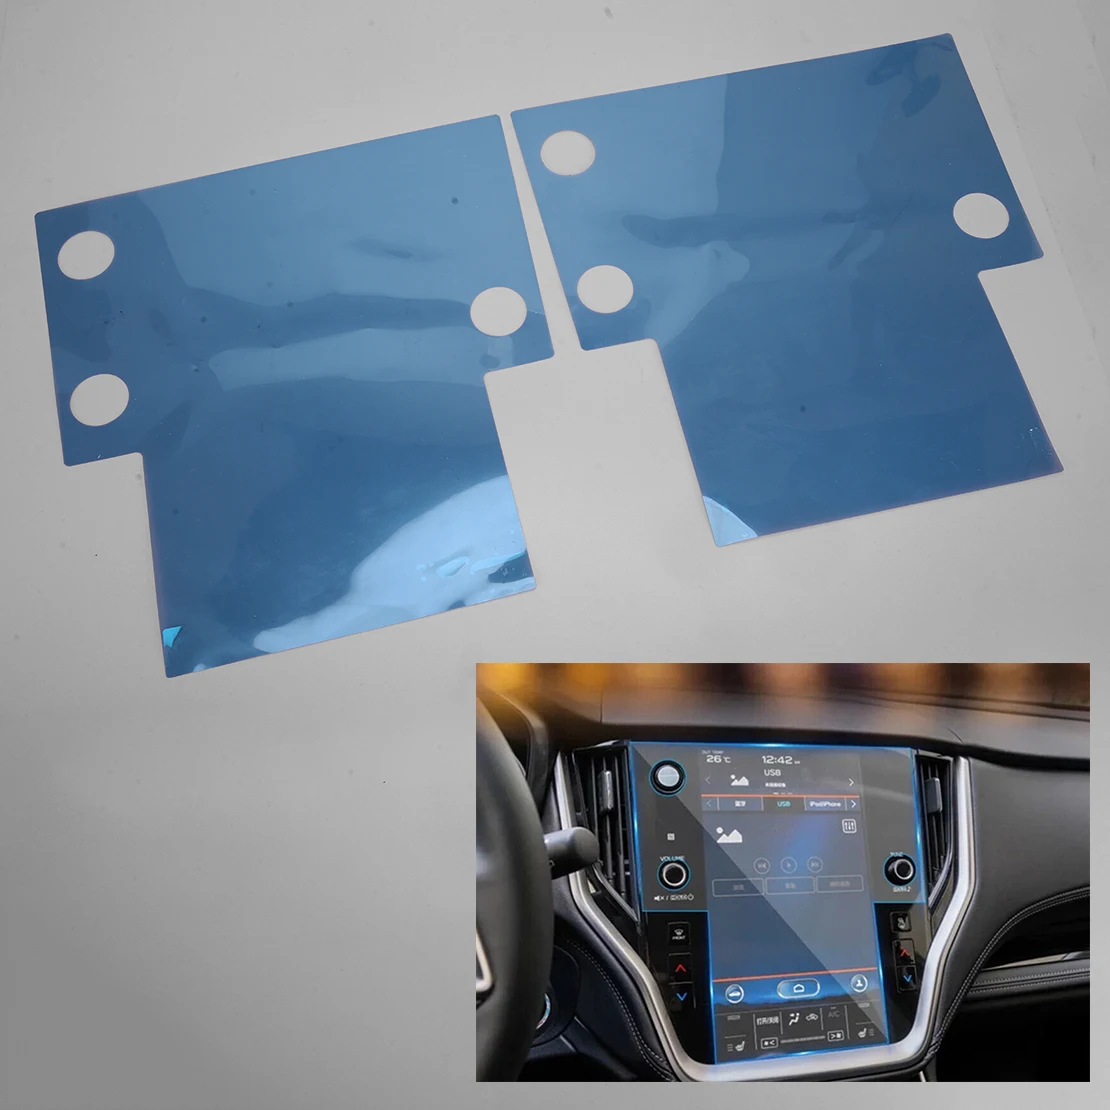 

2Pcs Clear 11.6" Car Central Navigation Media Touch Display Screen Protection Film Sticker Fit For Subaru Outback 2022 2021 2020